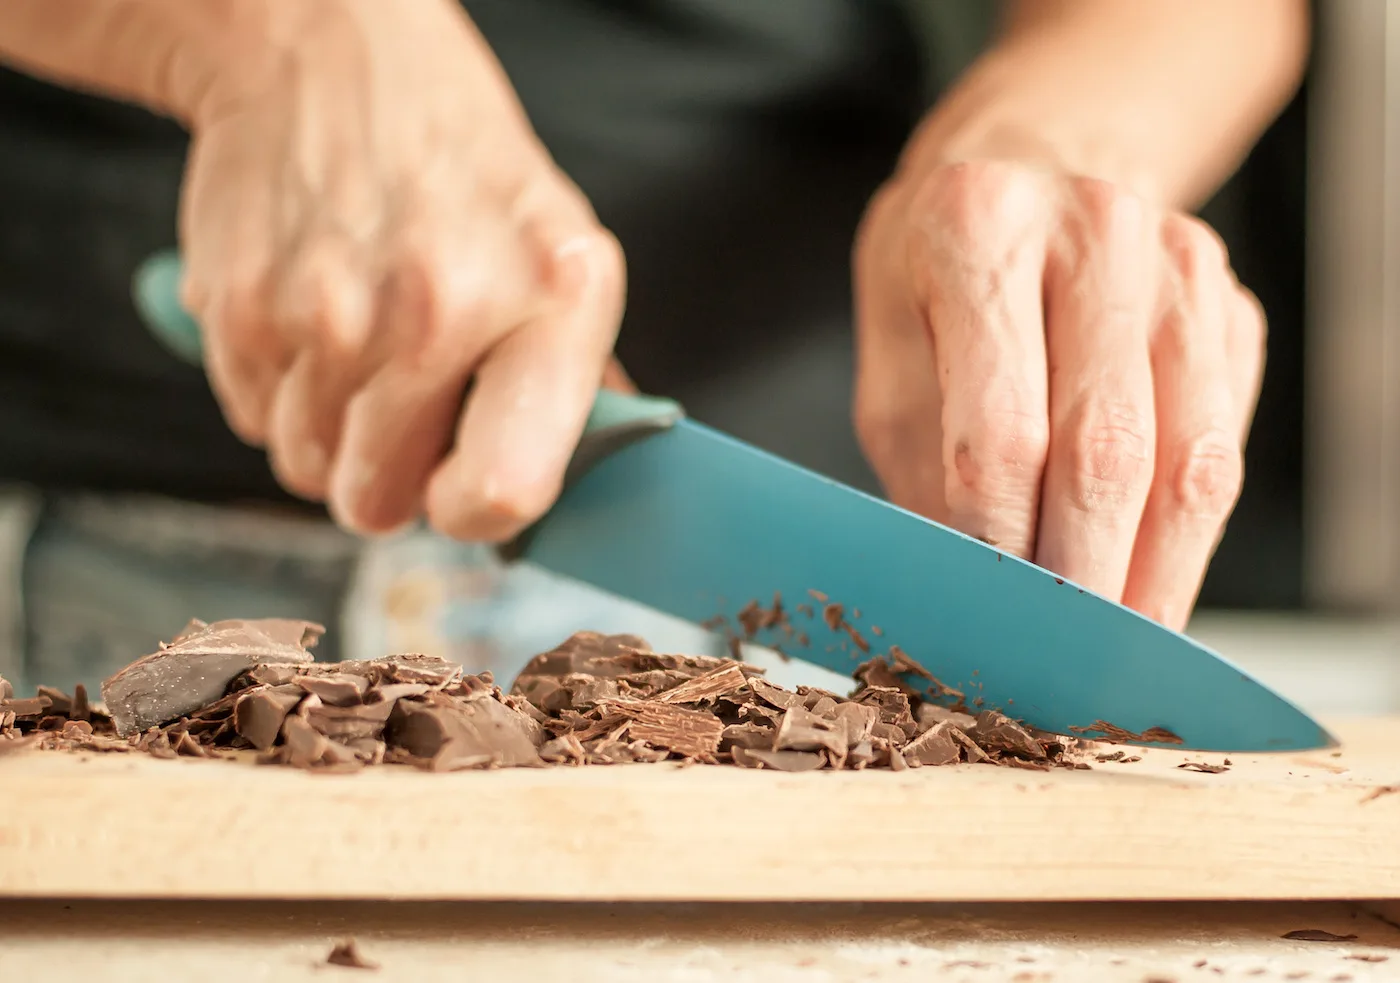 Chopping-chocolate-up-with-a-knife